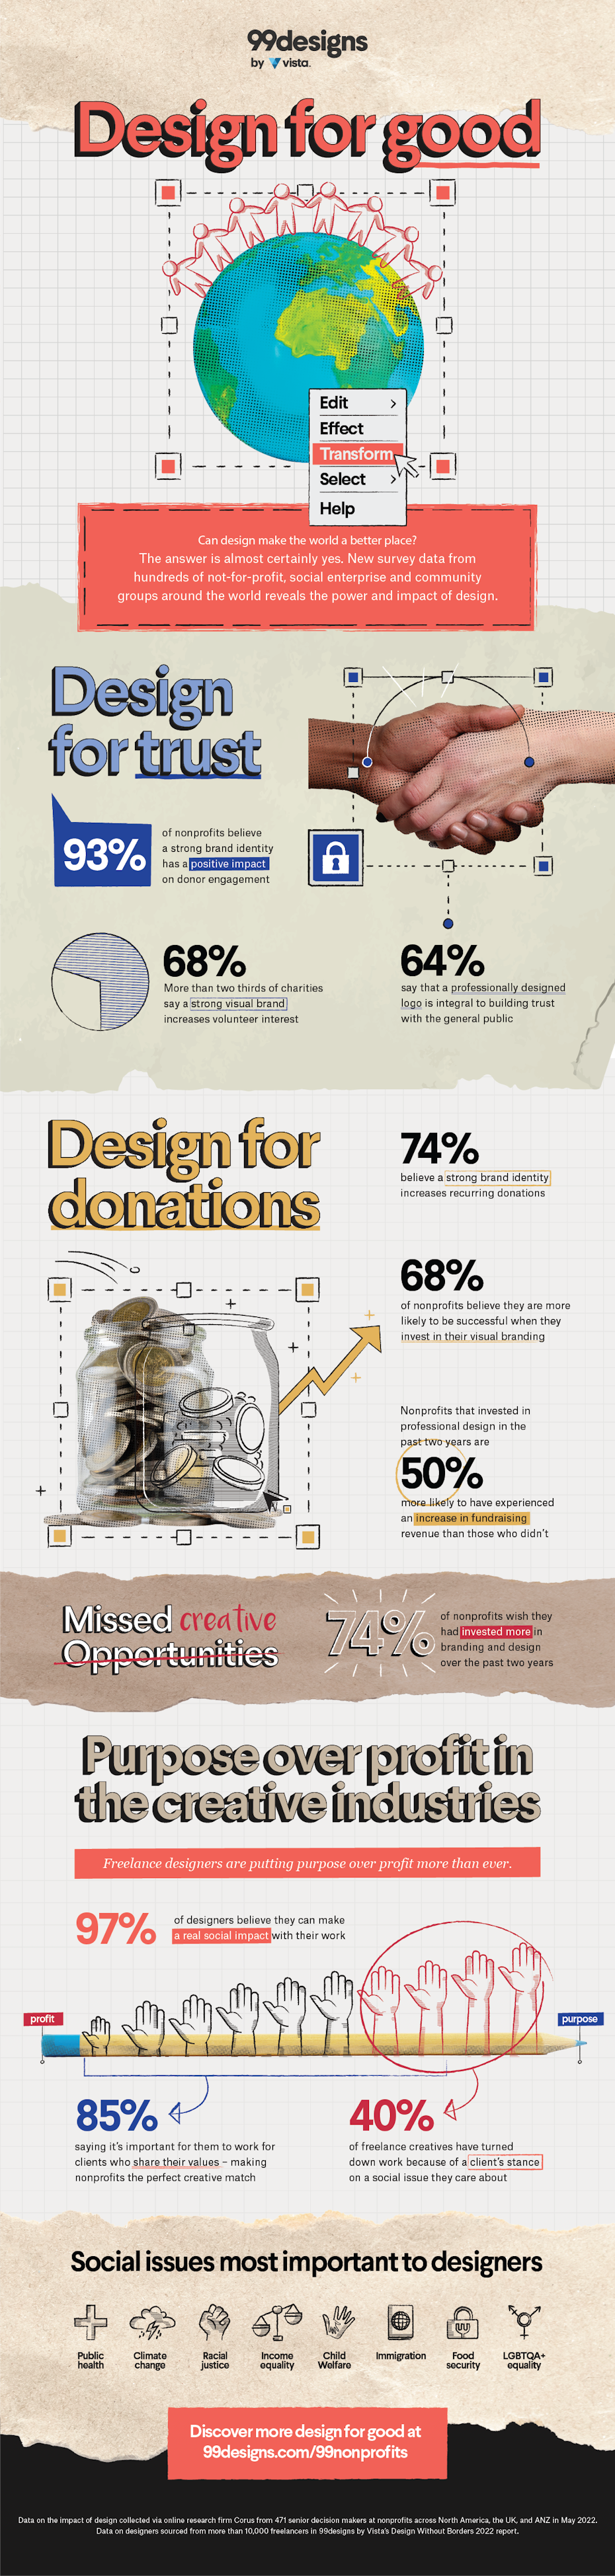 Infographic showing the benefits of great visual branding for nonprofits